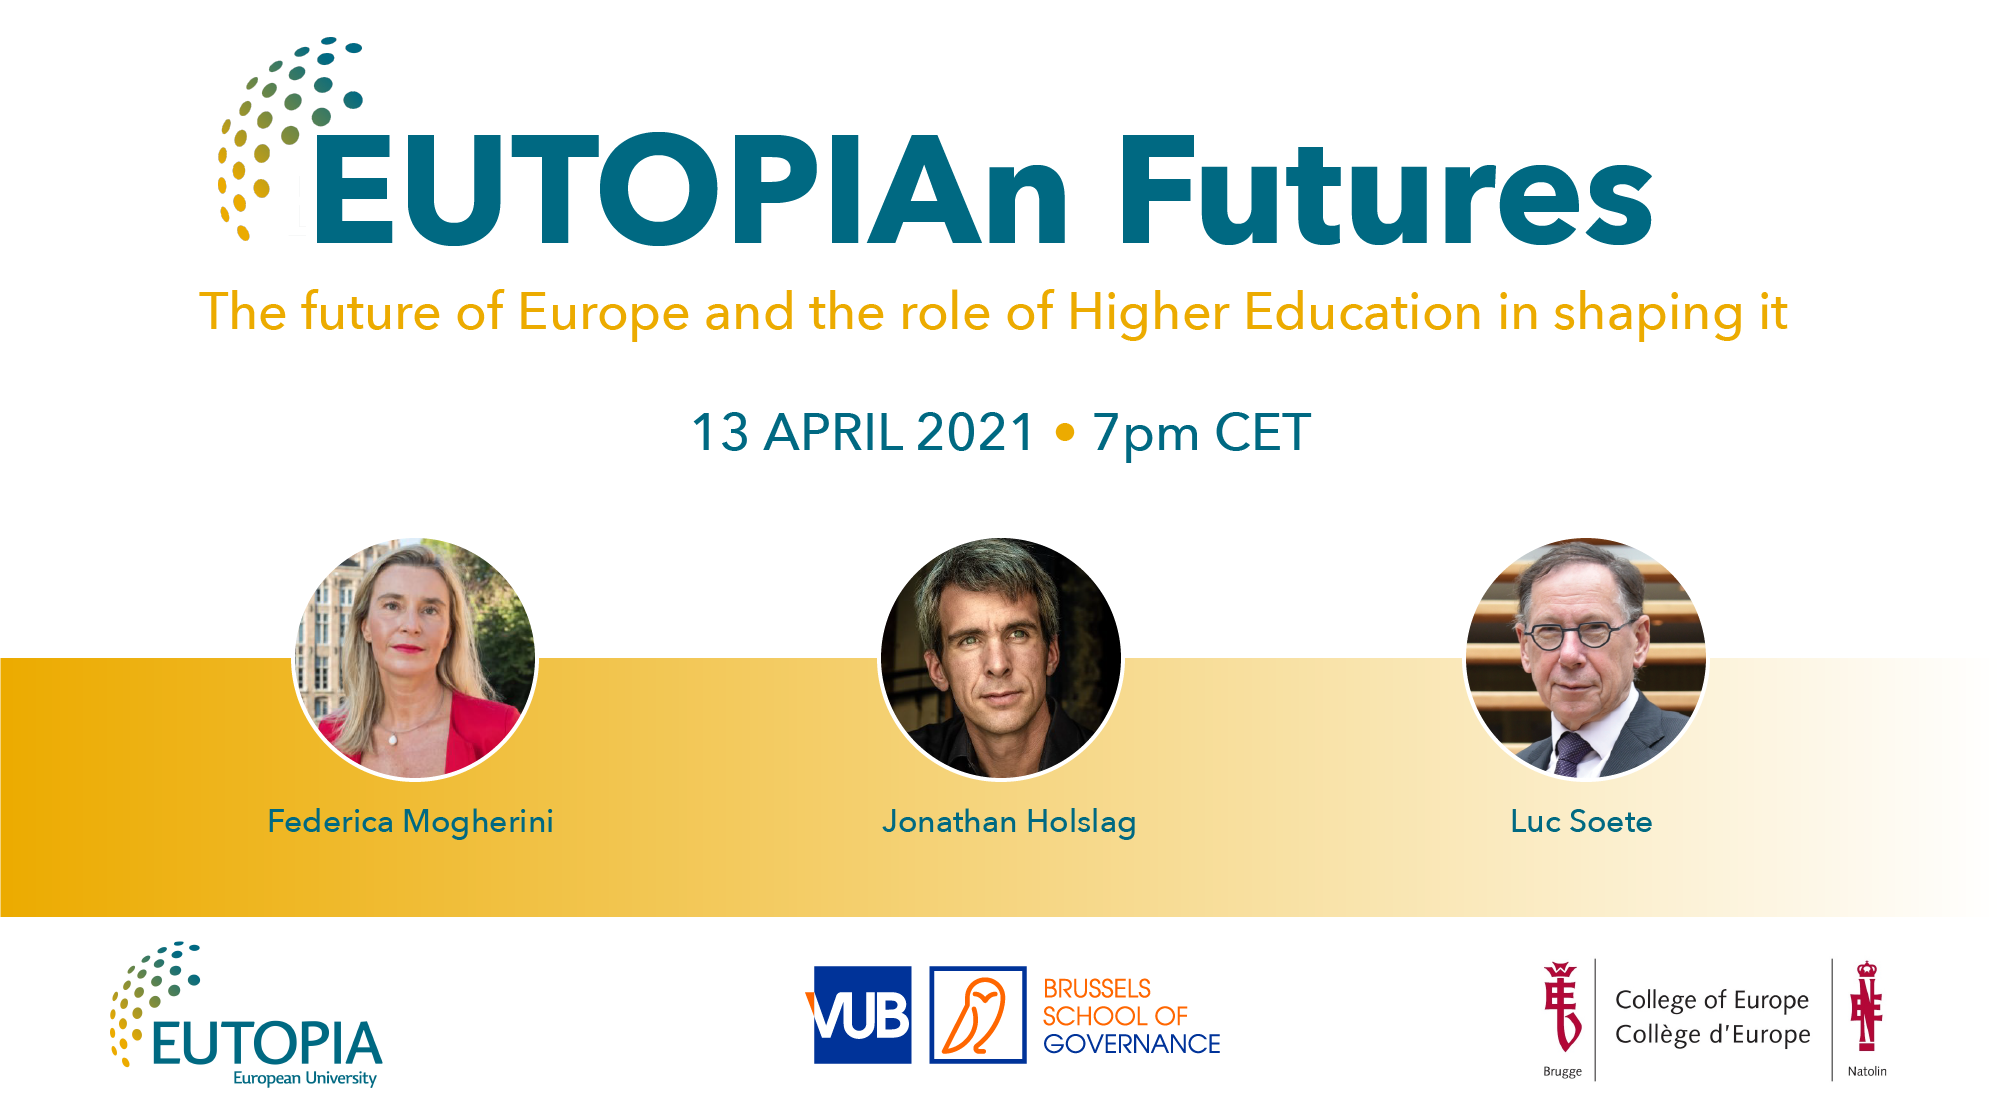 EUTOPIAn futures is almost here! 13 April 2021, 7pm - 9pm CET